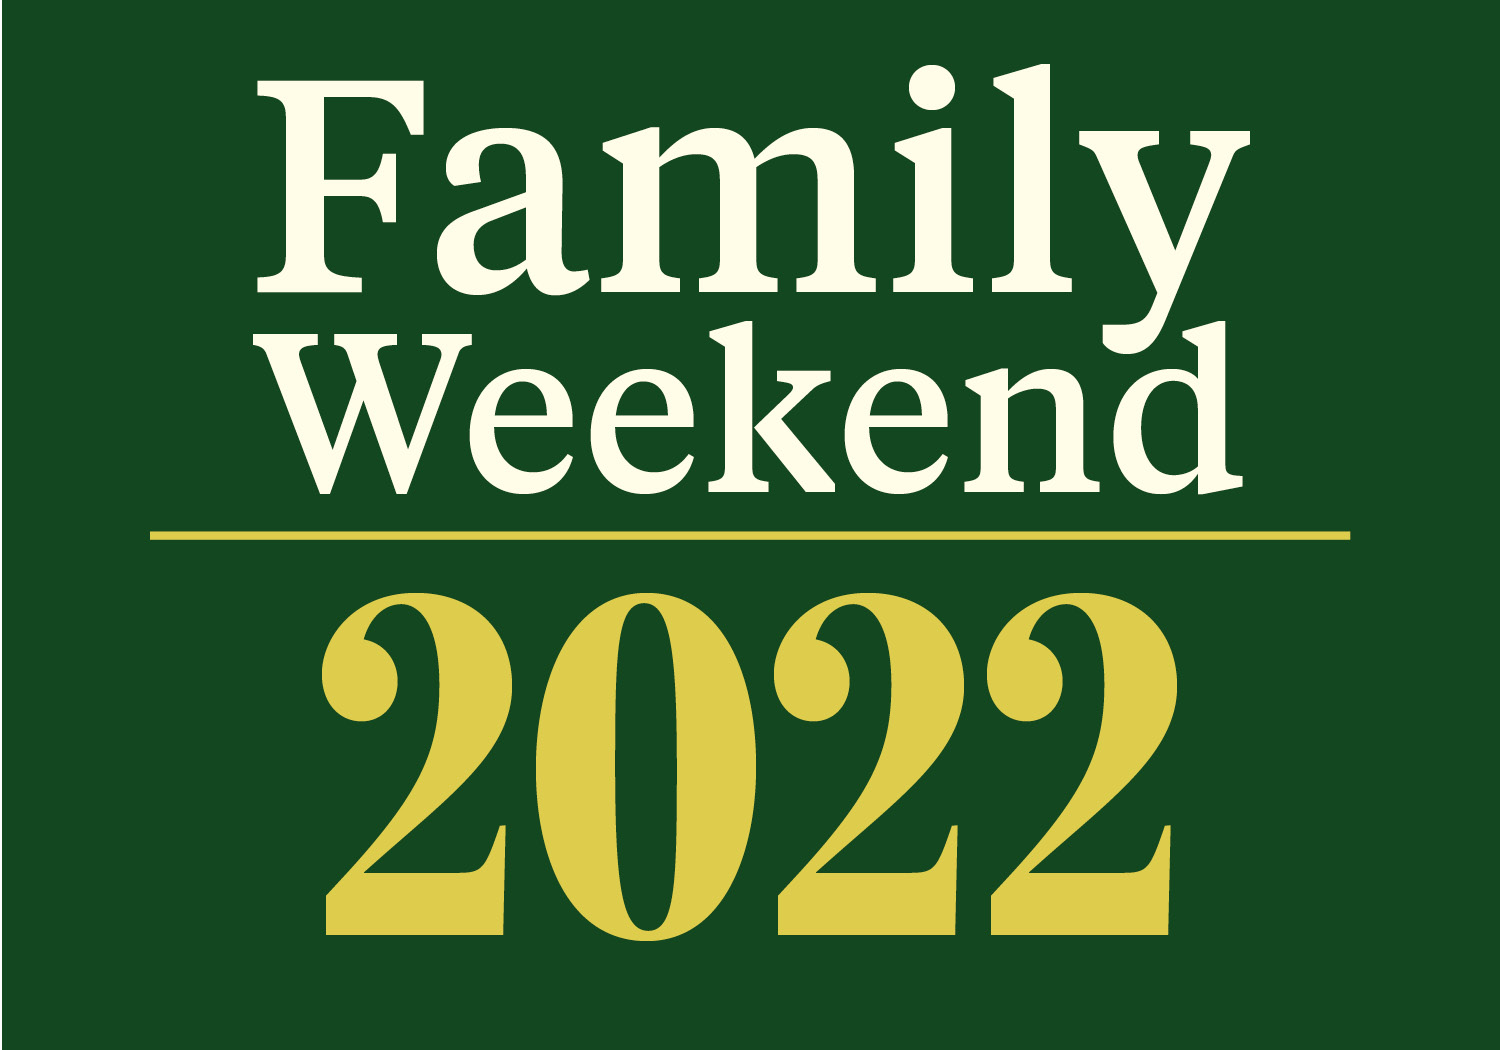 Family weekend 2022 2 1